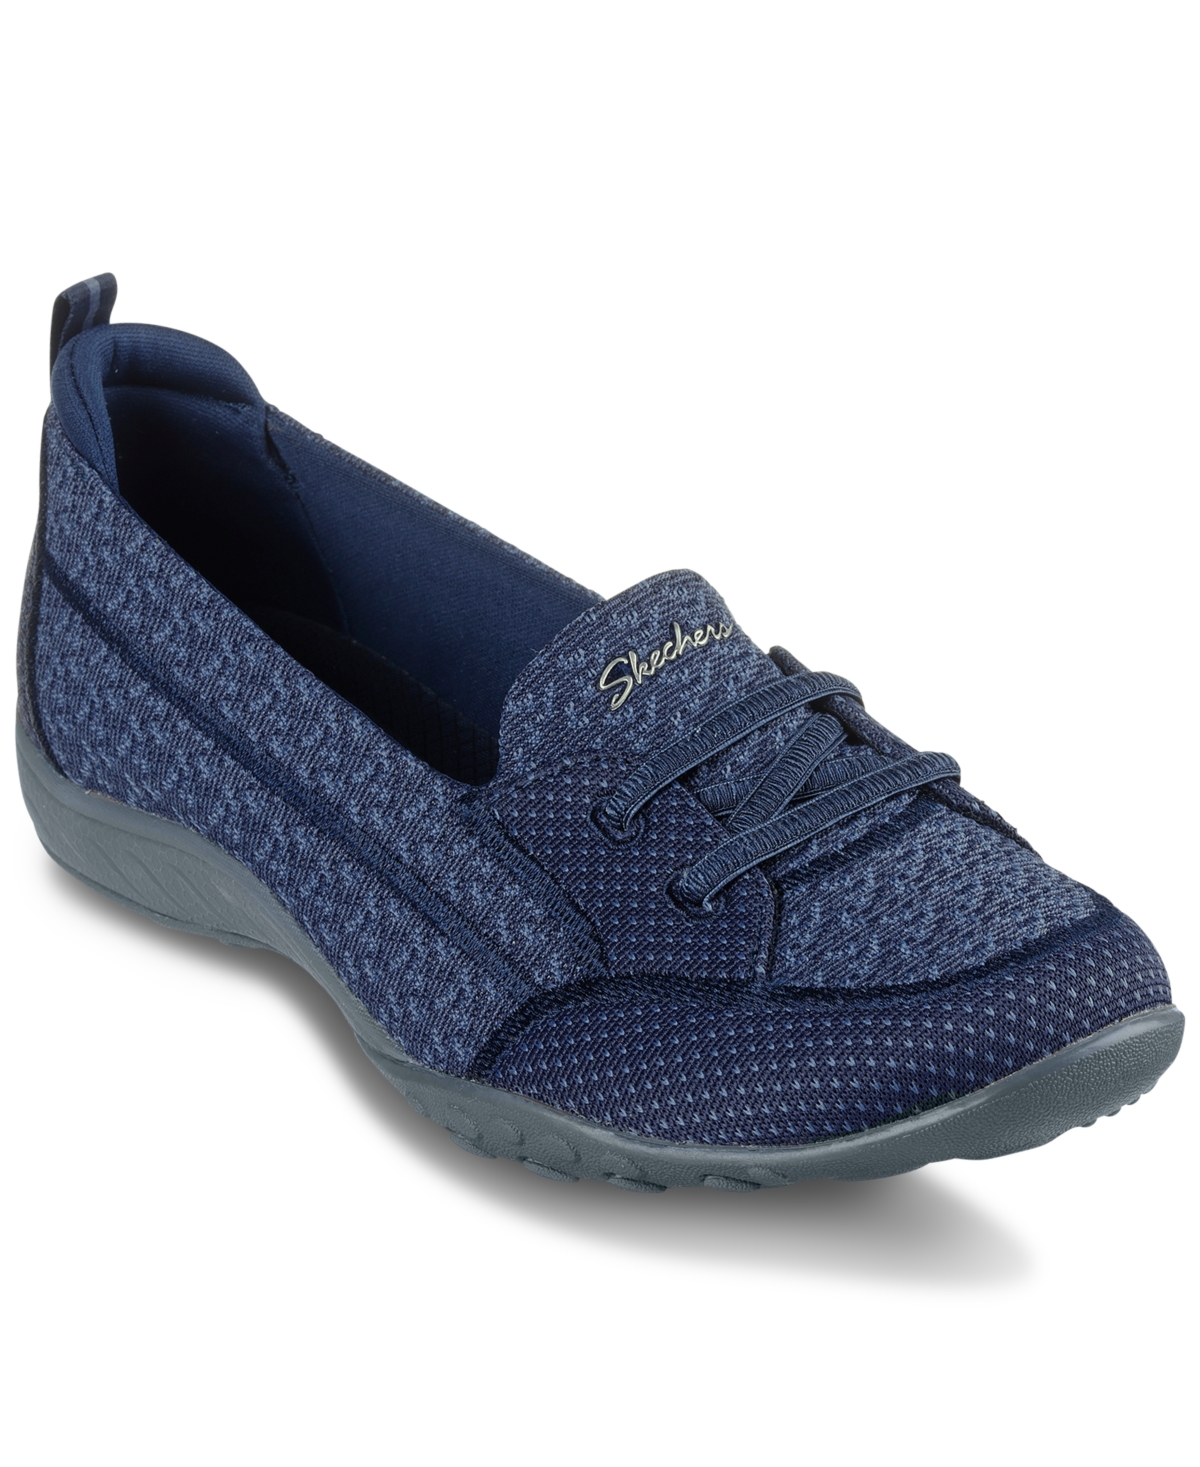 Women's Breathe Easy - Holding Slip-On Casual Sneakers from Finish Line - Navy